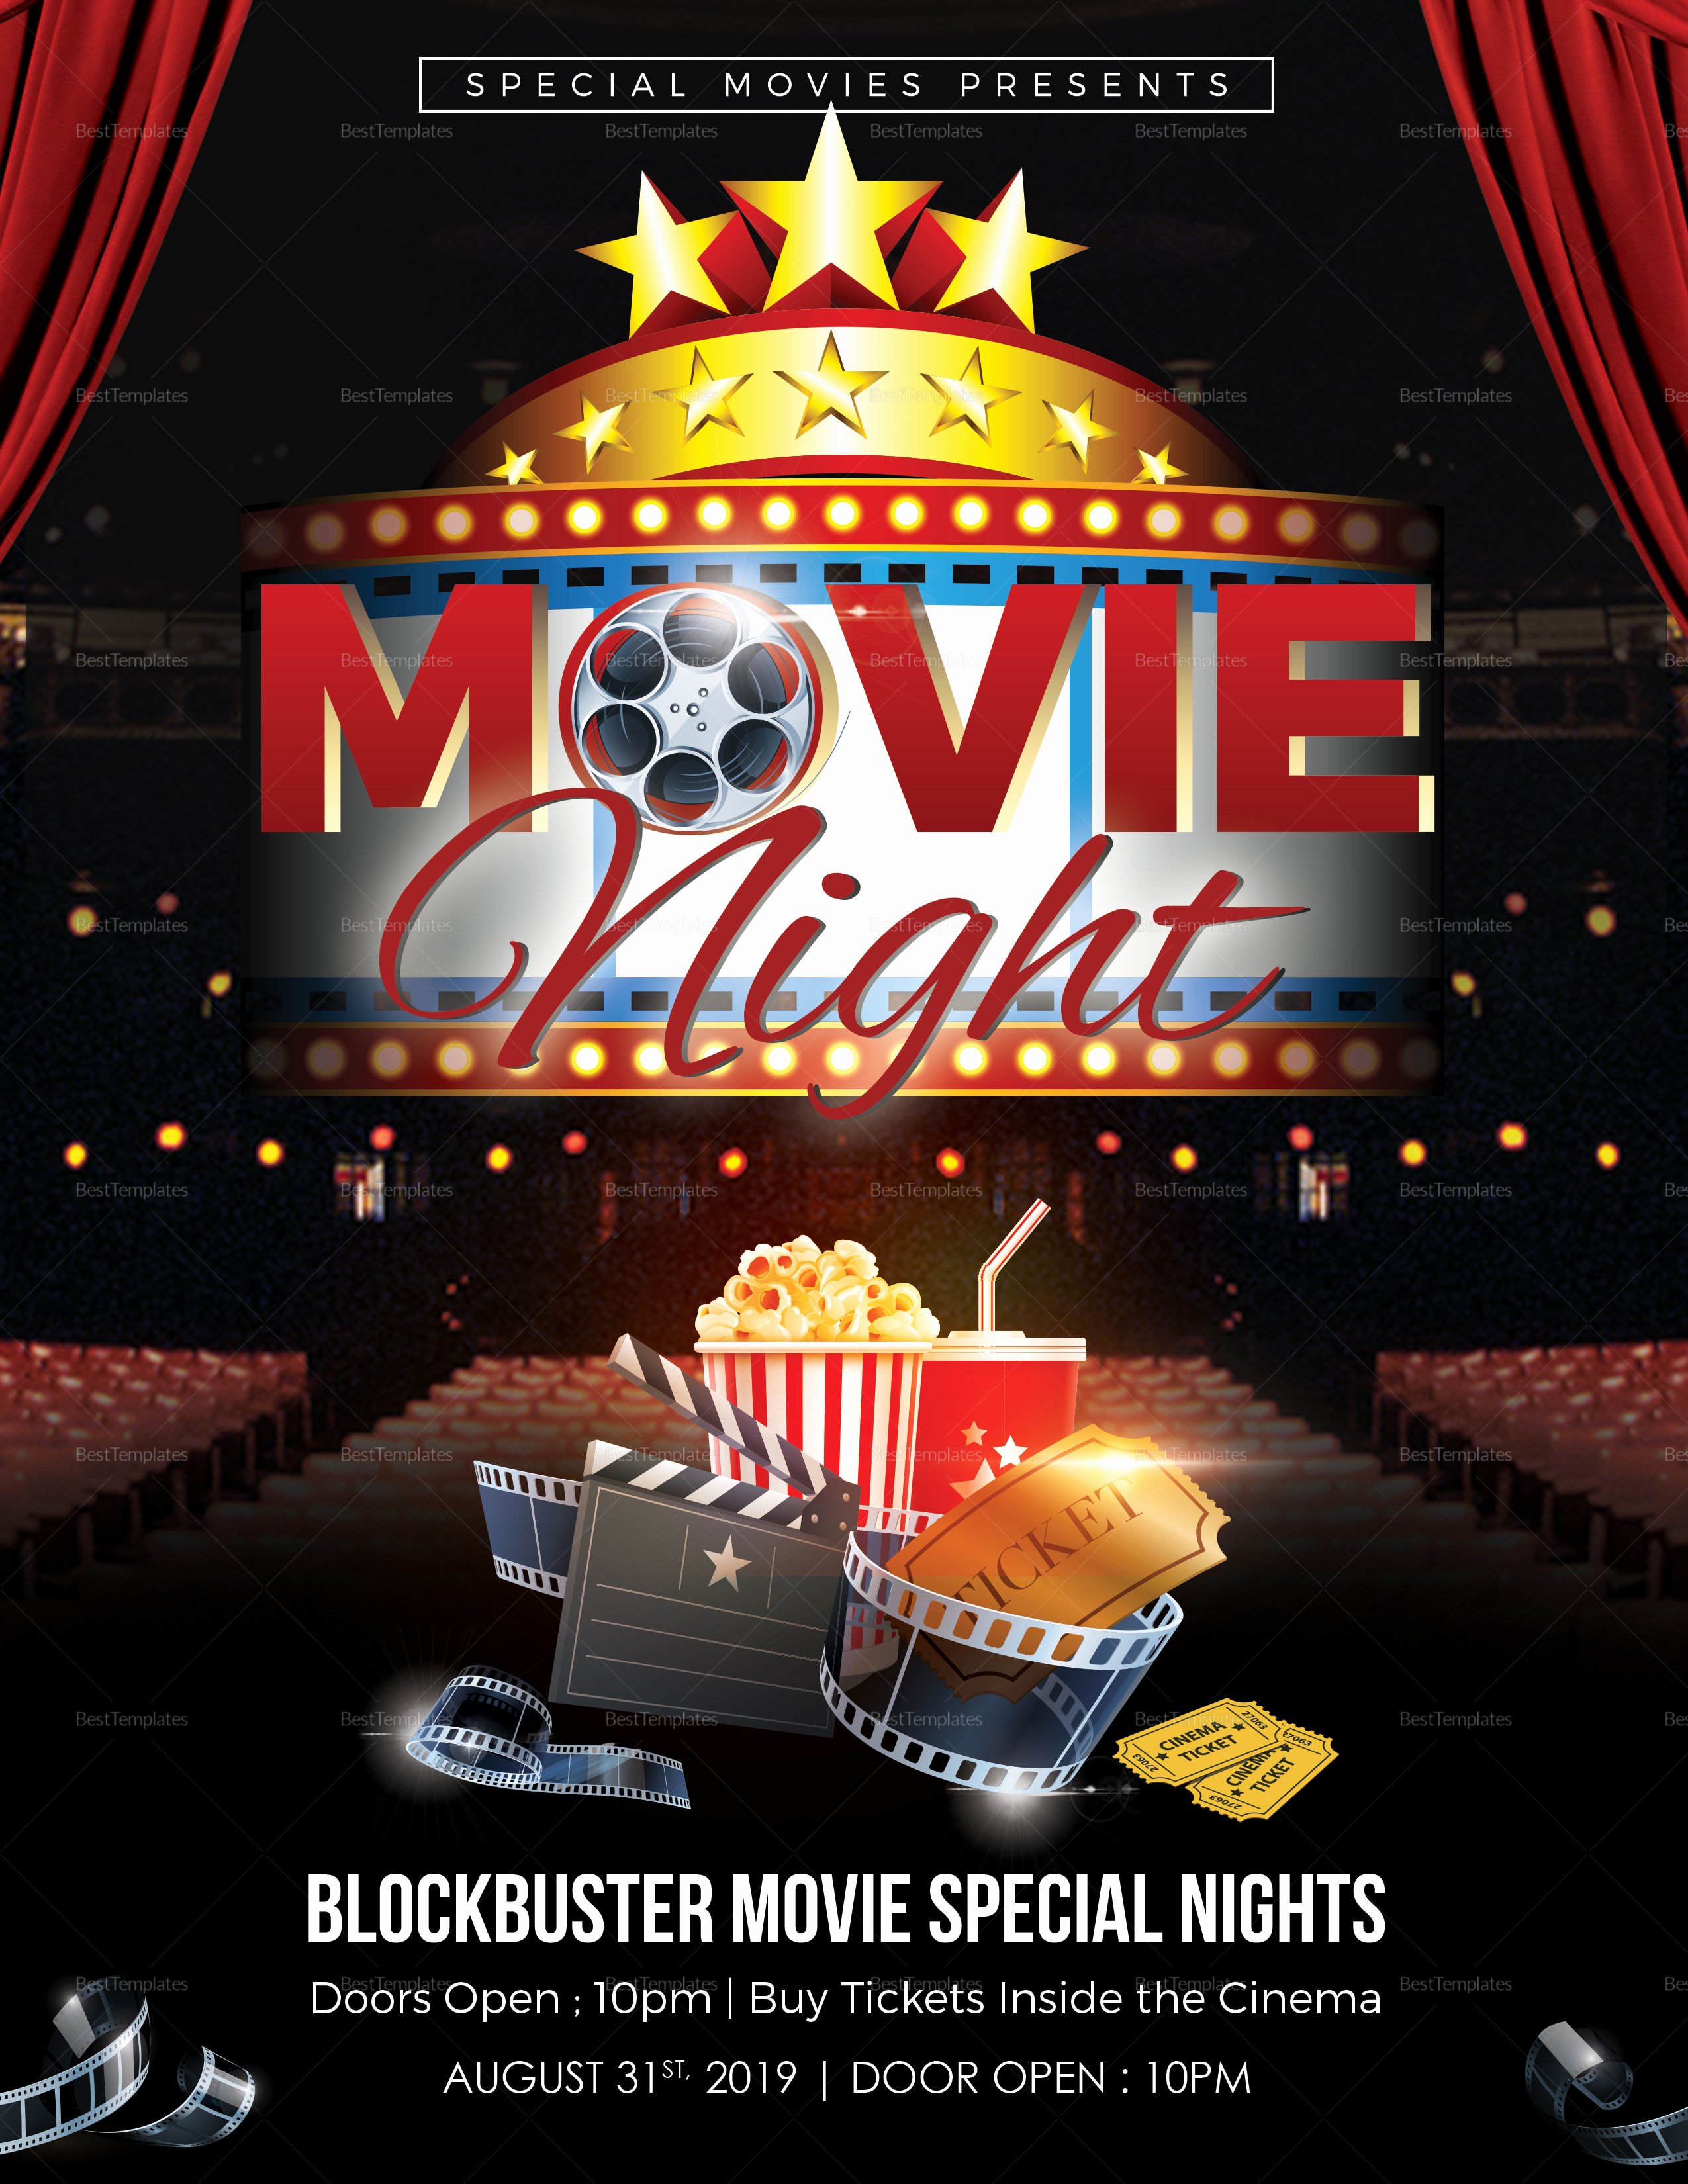 Free Movie Night Flyer Template Lovely Printable Movie Night Flyer Design Template In Word Psd